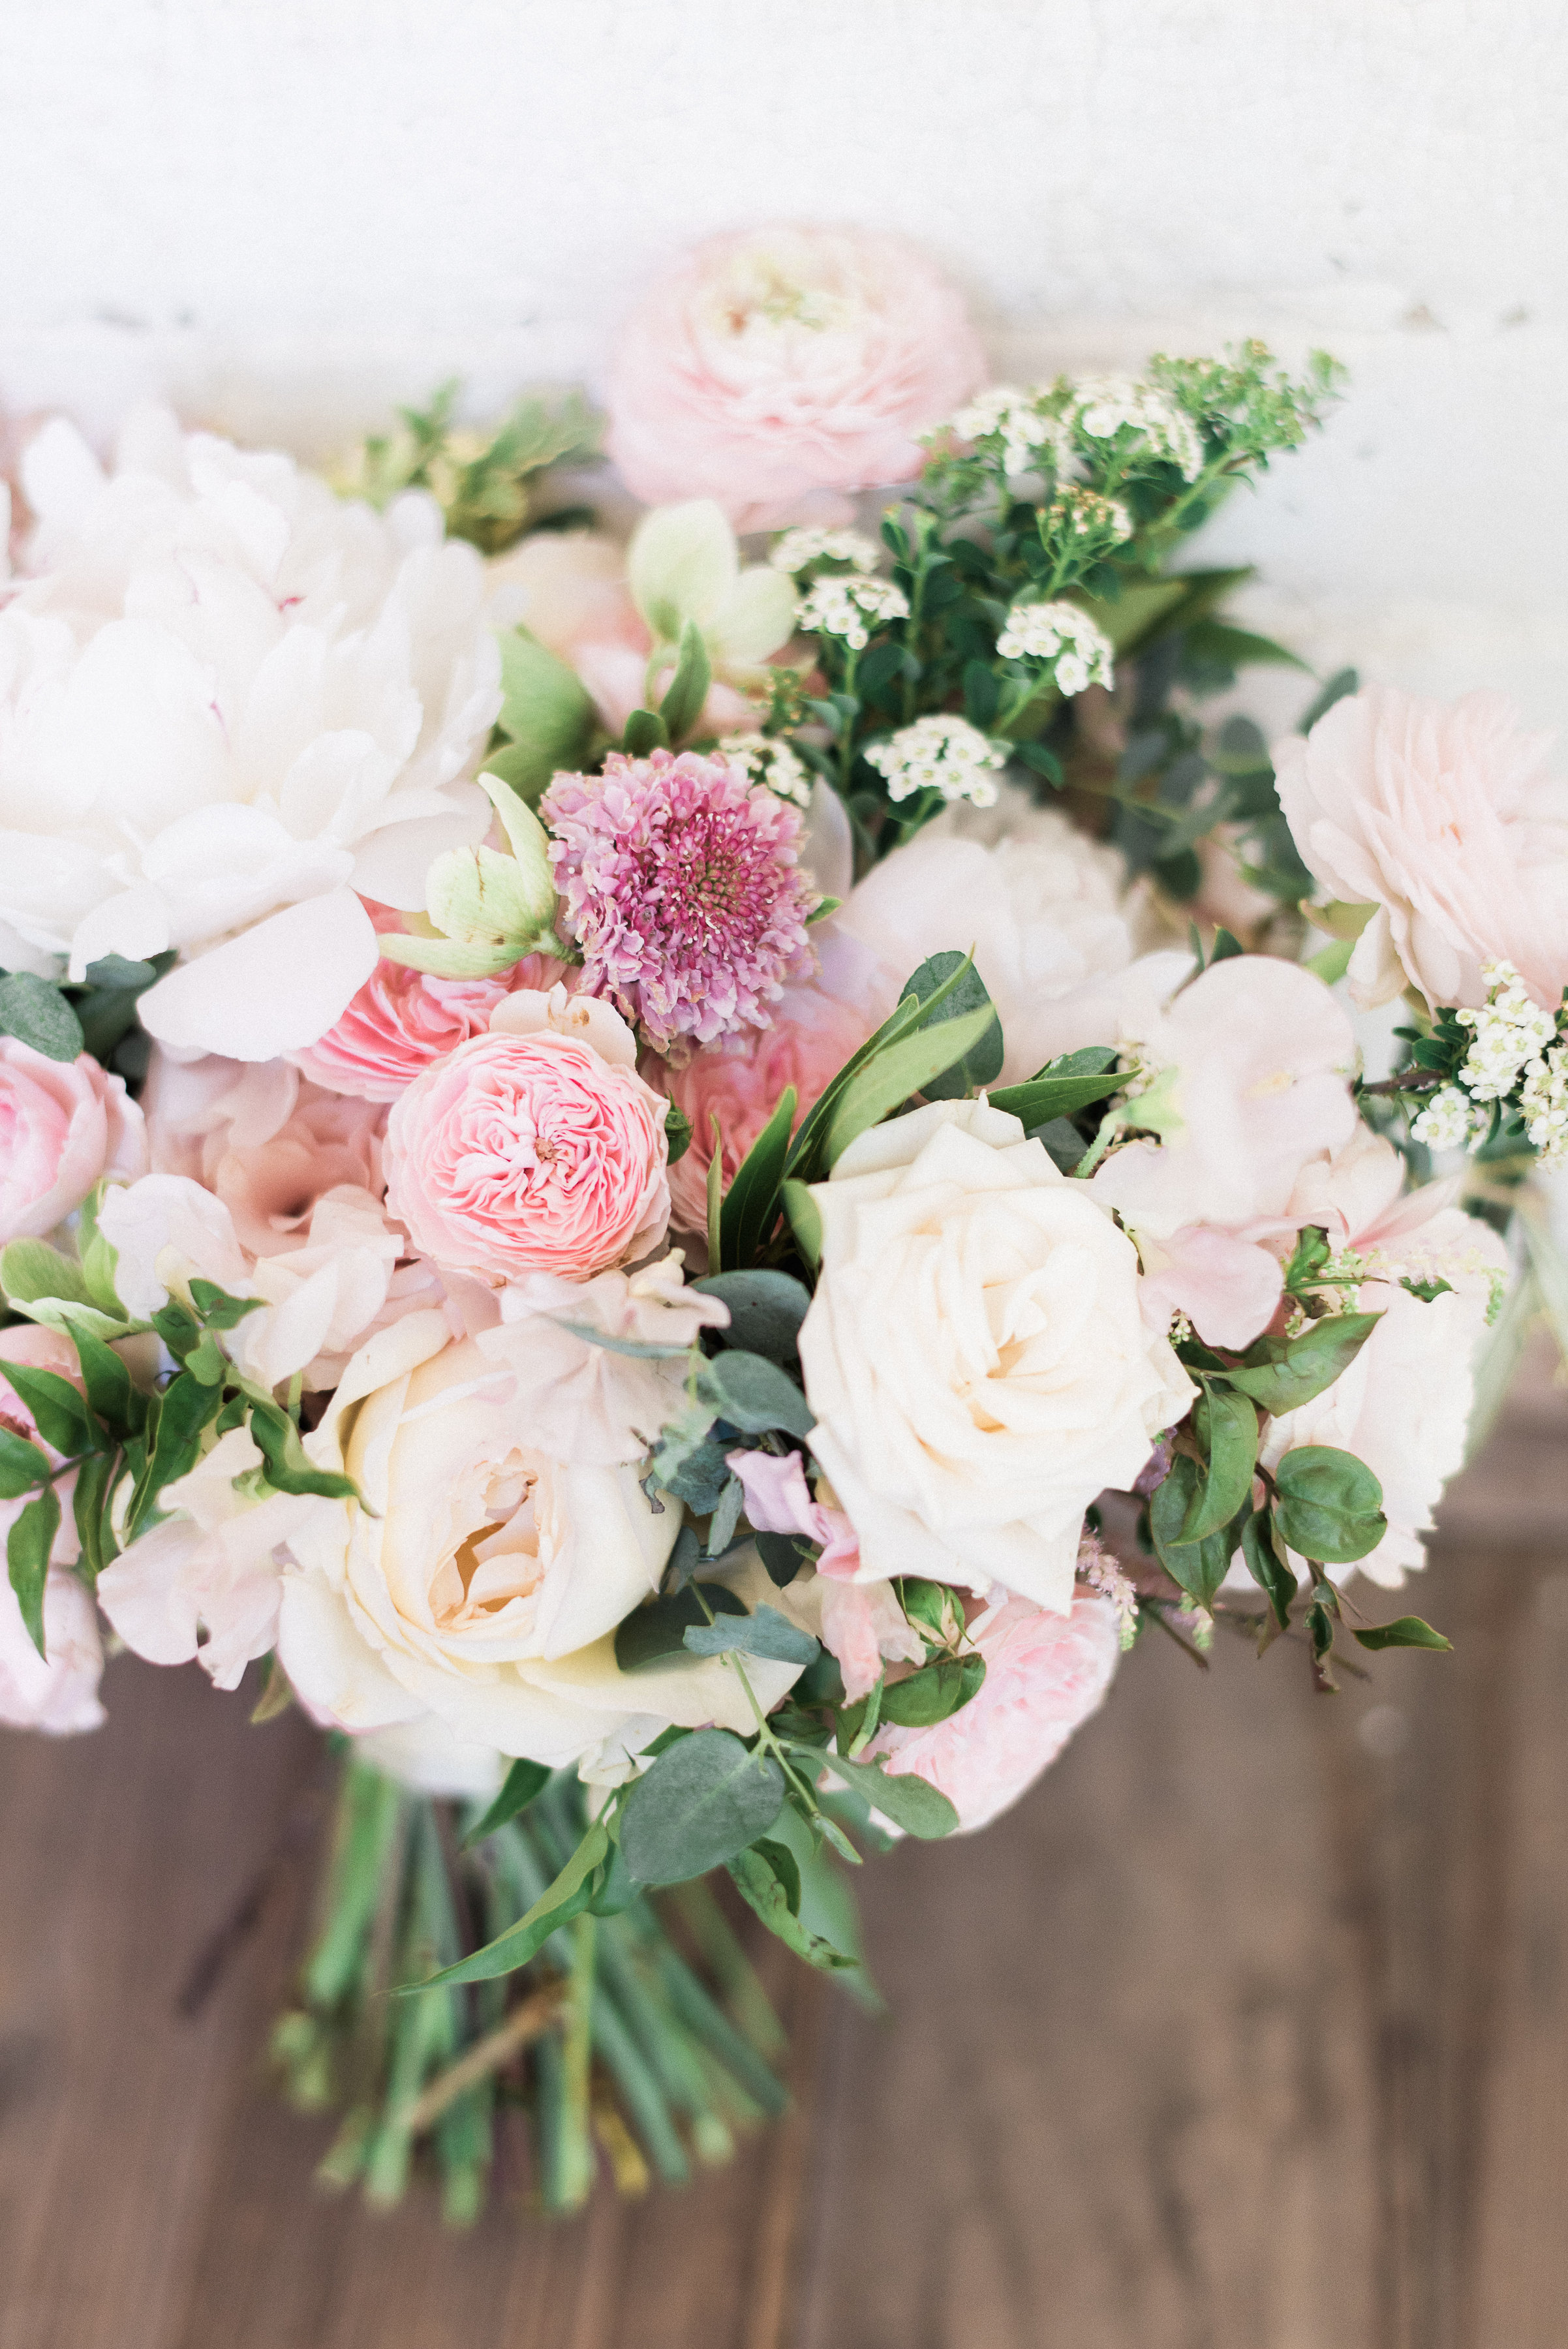 Blush and ivory bridal bouquet with peonies, ranunculus, and lush greenery // Nashville Wedding Florist